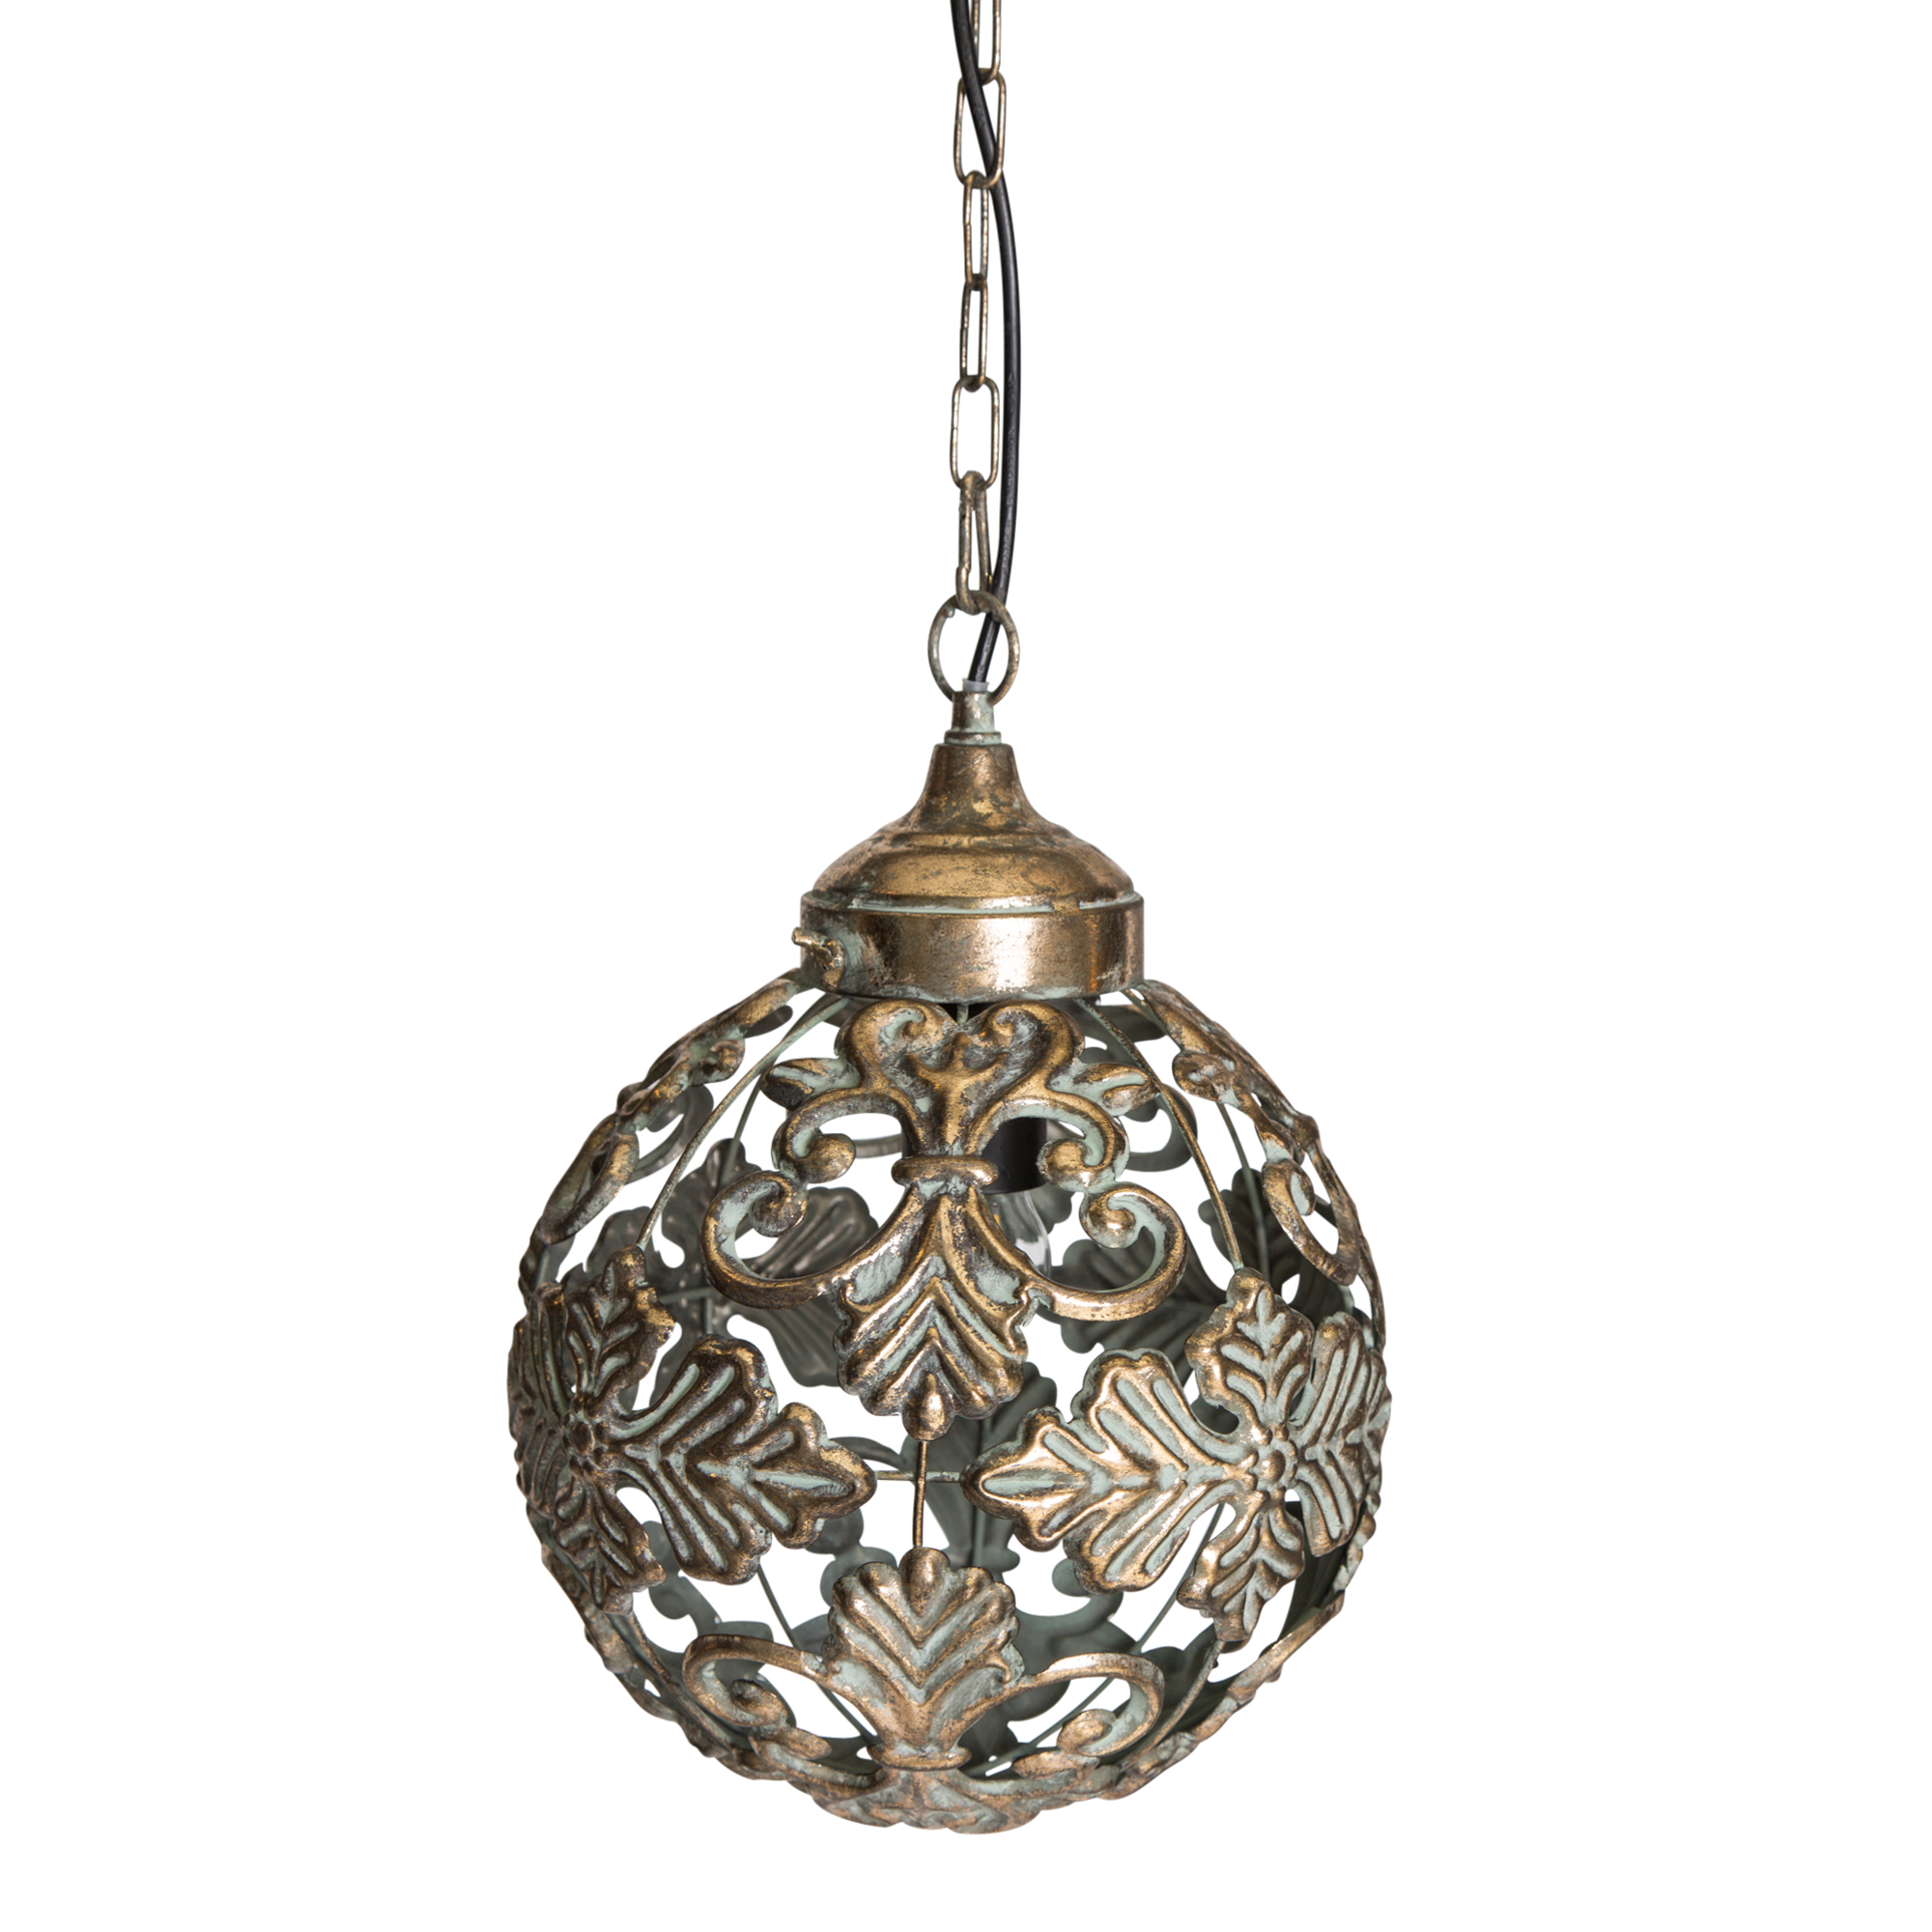 PTMD Enza Gold hanglamp ornament